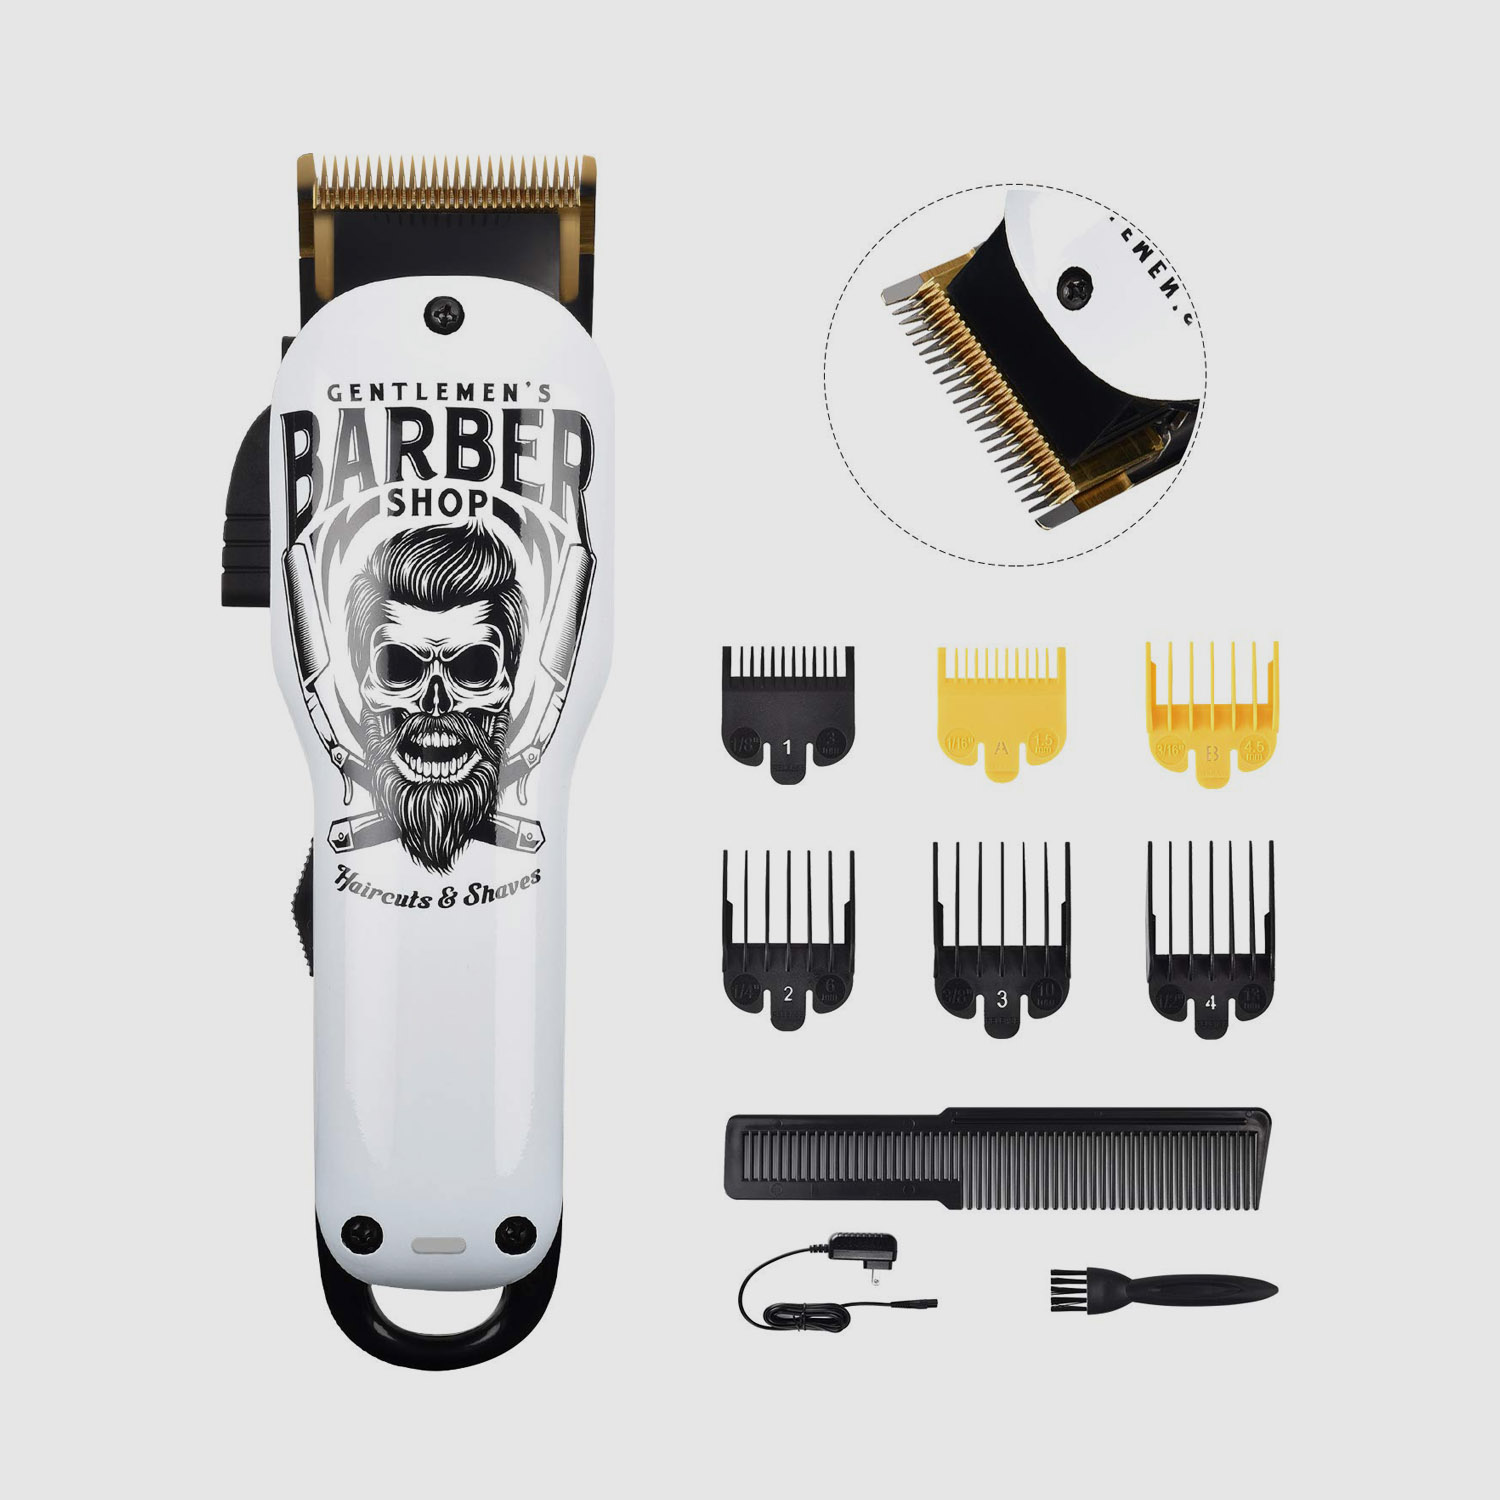 Professional Cordless Haircut Kit Rechargeable 2000mAh with 6 Guide Combs - 0